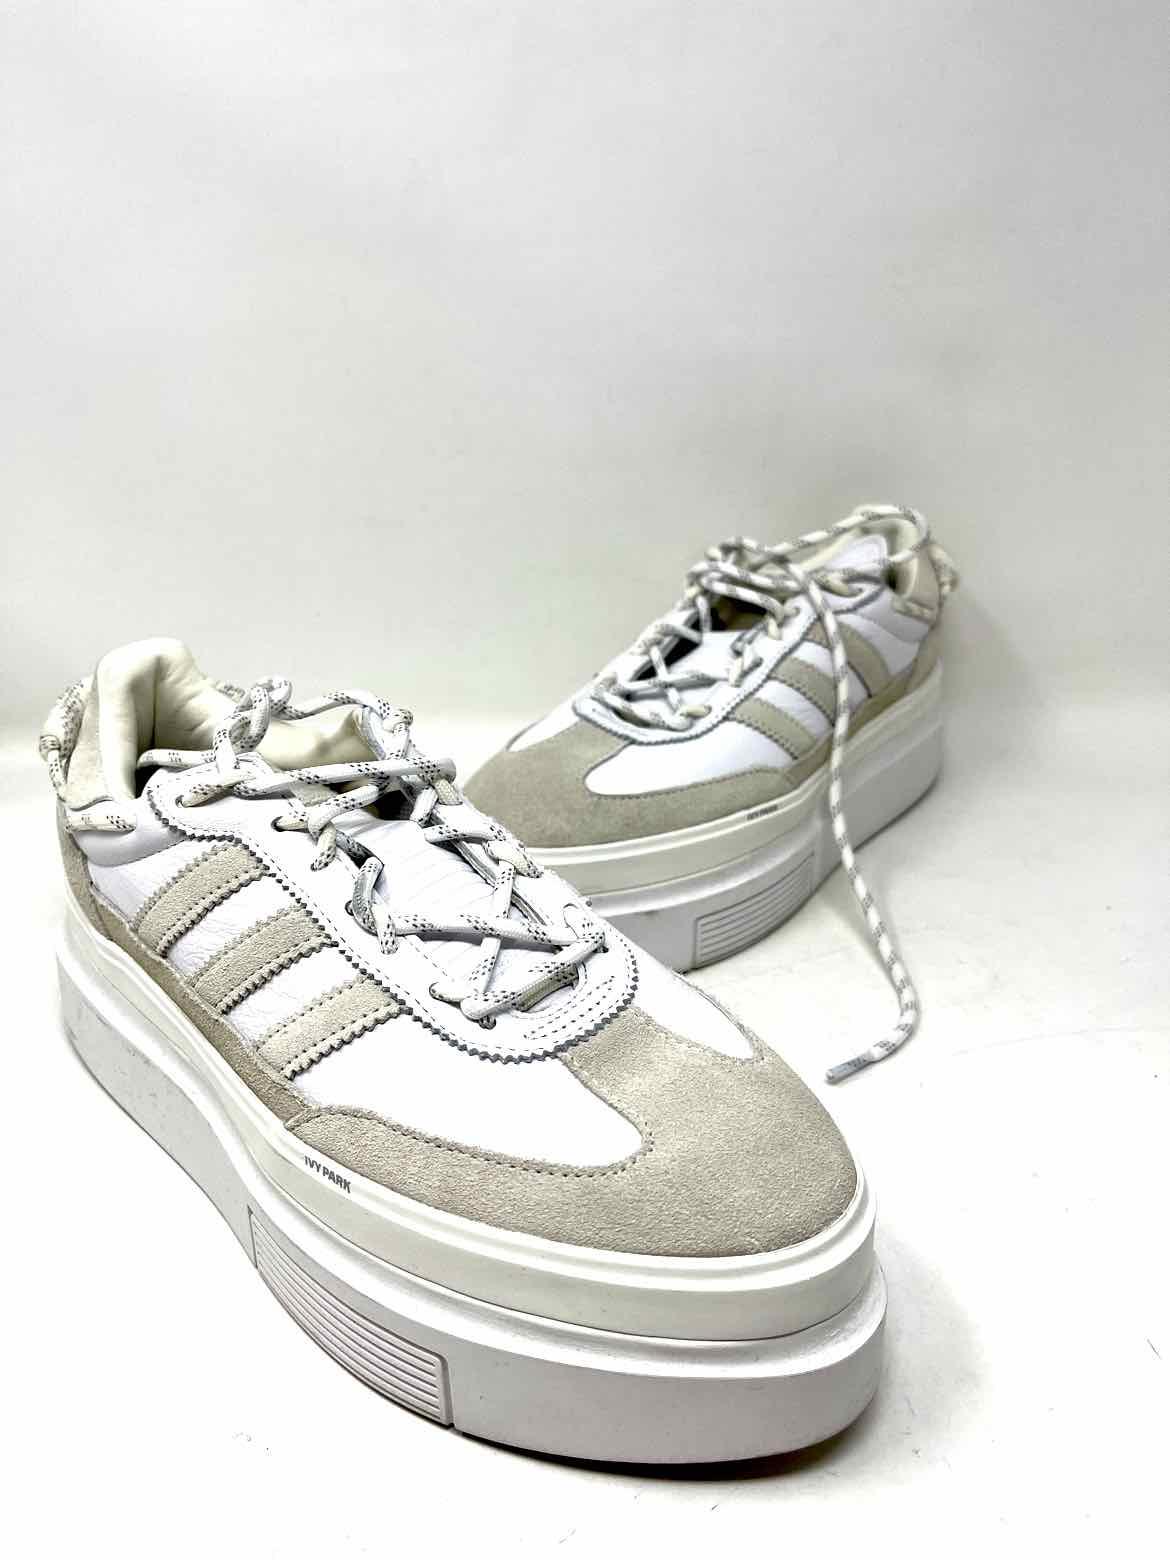 Adidas x IVY PARK Women White/Beige Lace-up Leather Suede Platform 9.5  Sneakers